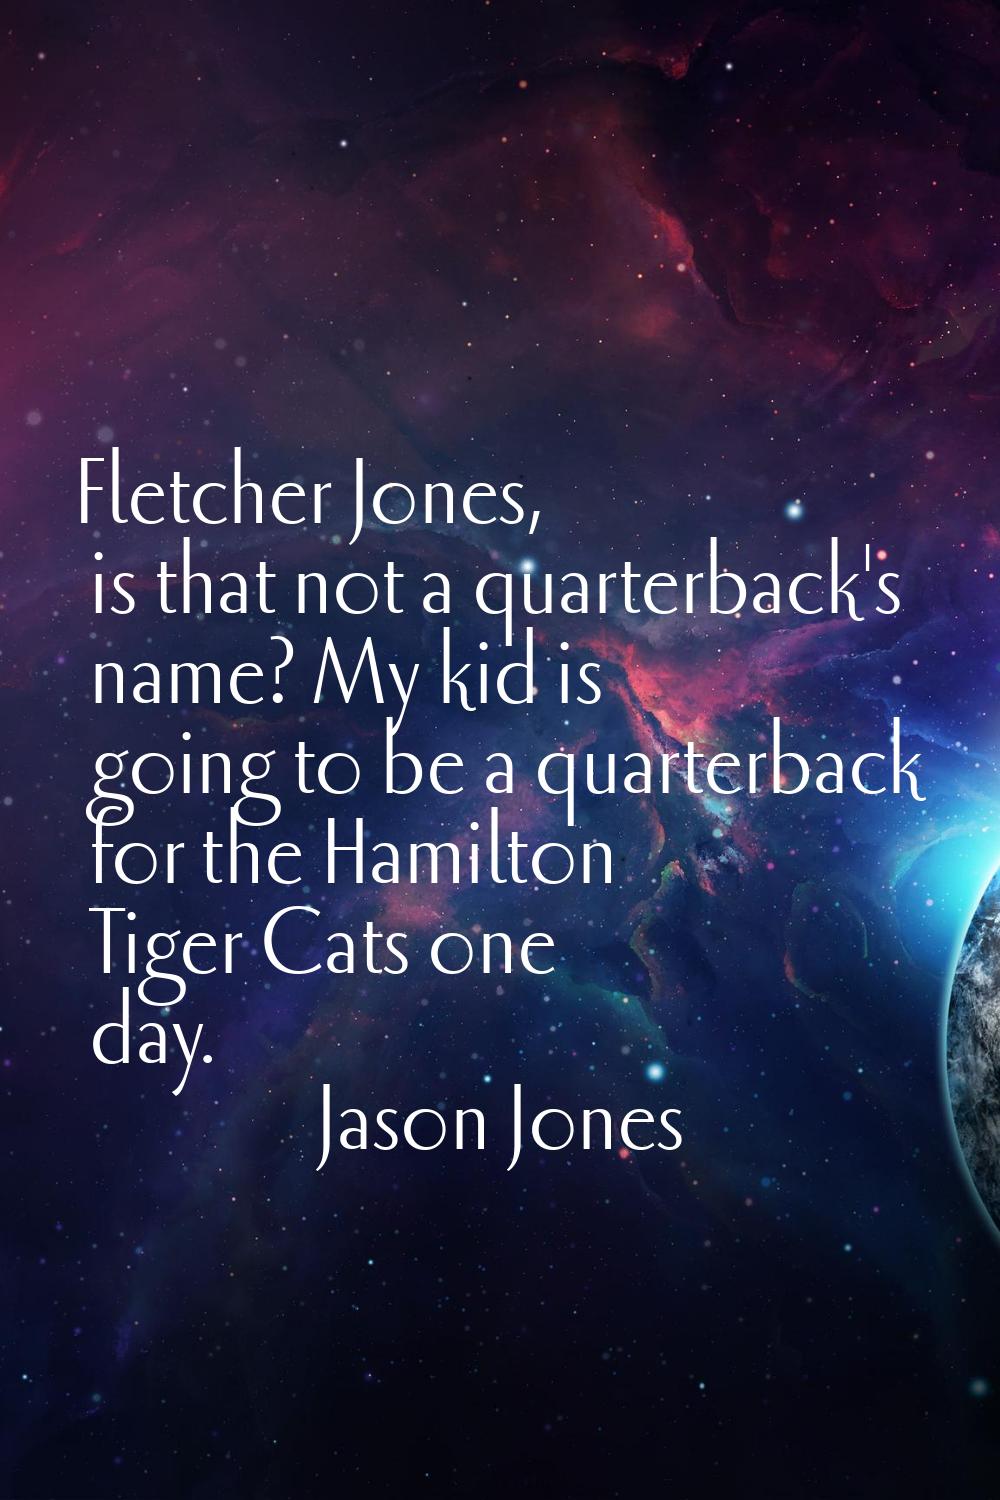 Fletcher Jones, is that not a quarterback's name? My kid is going to be a quarterback for the Hamil